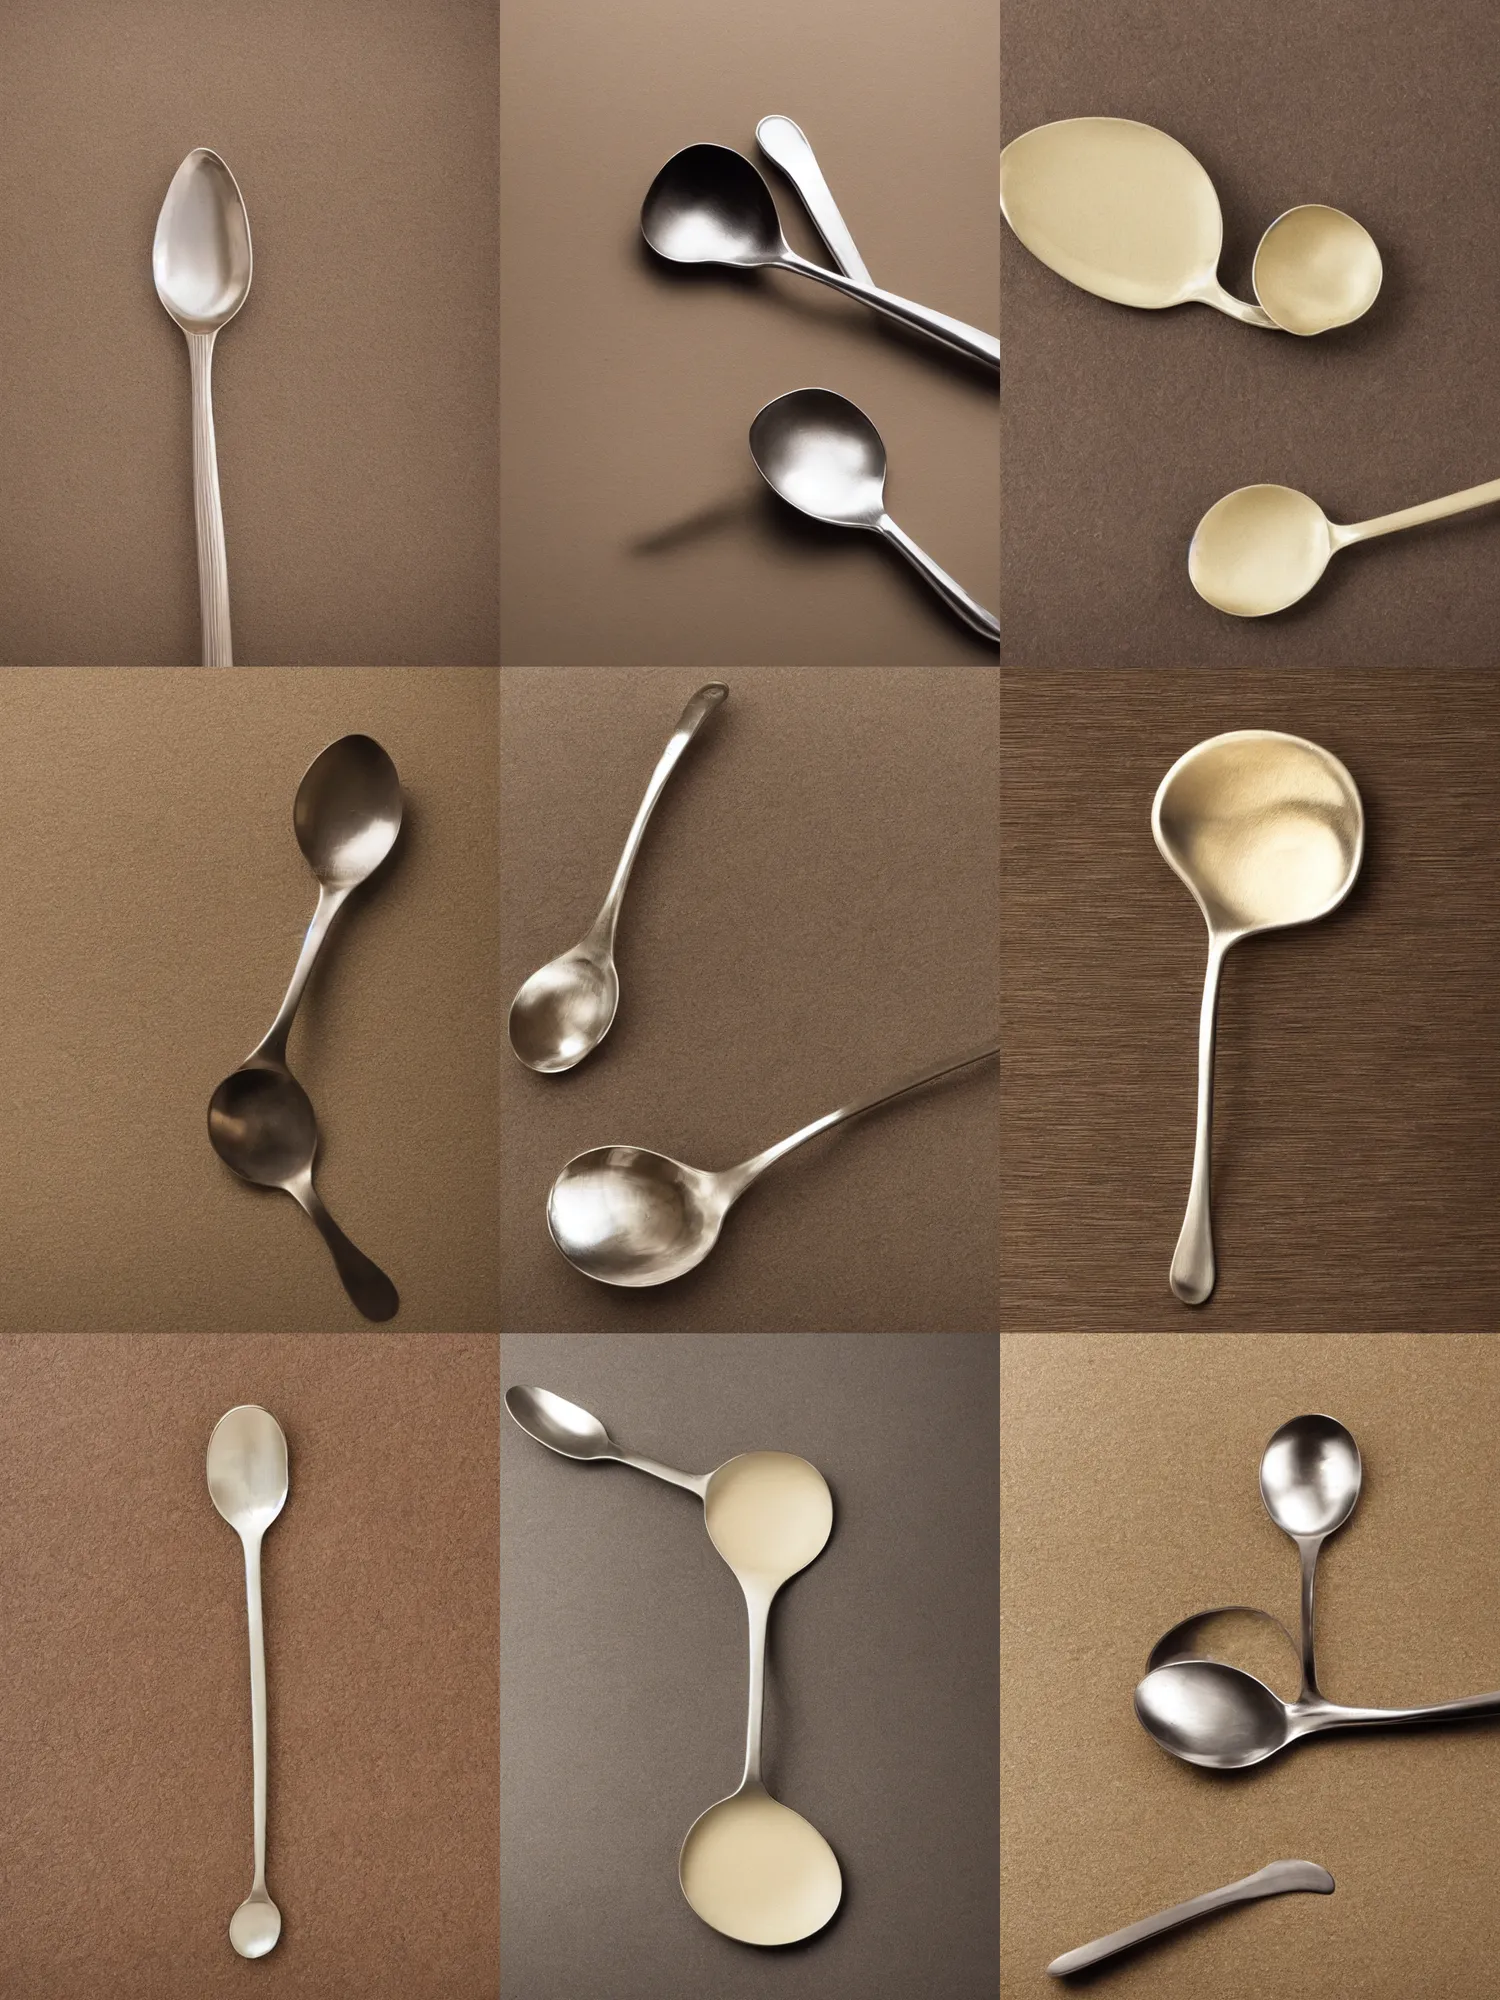 Prompt: framed stock picture of single stainless steel spoon, slightly rotated along its major axis, late'9 0 s to early 2 0 0 0 s, beige to creme background